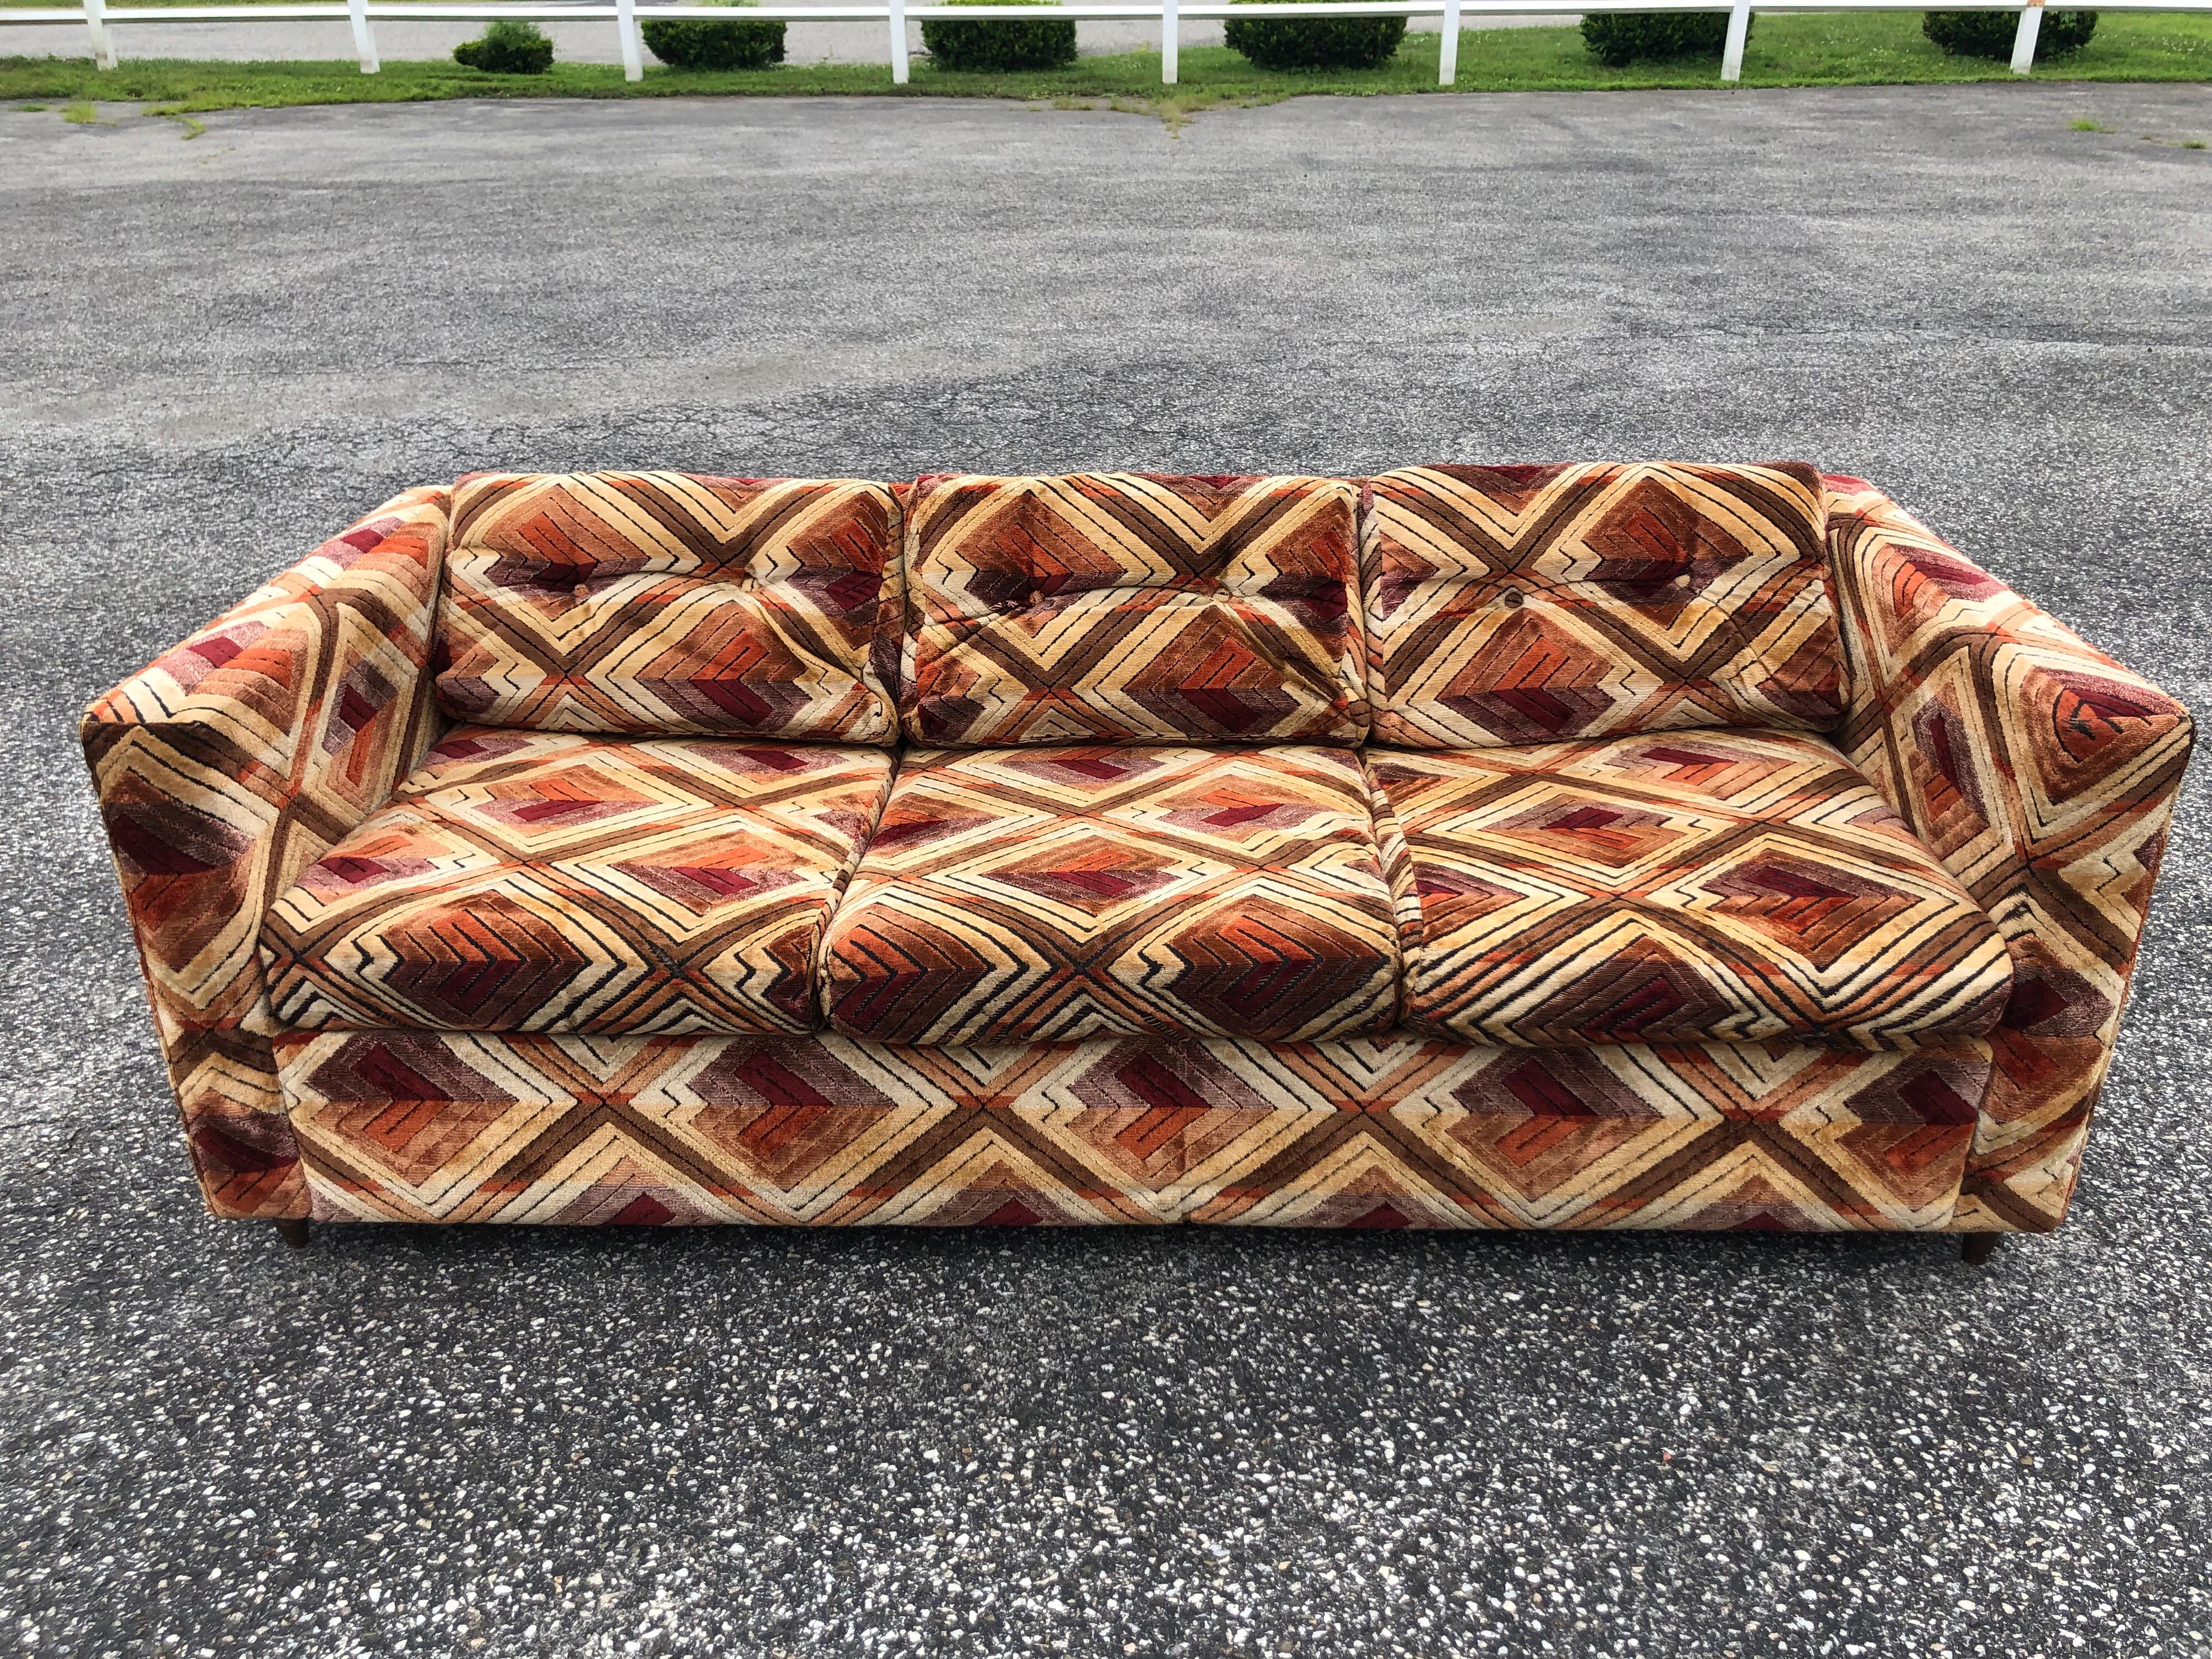 1970s Milo Baughman style sofa with Jack Lenor Larsen Upholstery. Chevron patterned velour/velvet style. So retro 1970s. Perfect for the mod set design. Pulls out to a sofa bed. Some wear to underside of pillows. So foam is showing through. Please